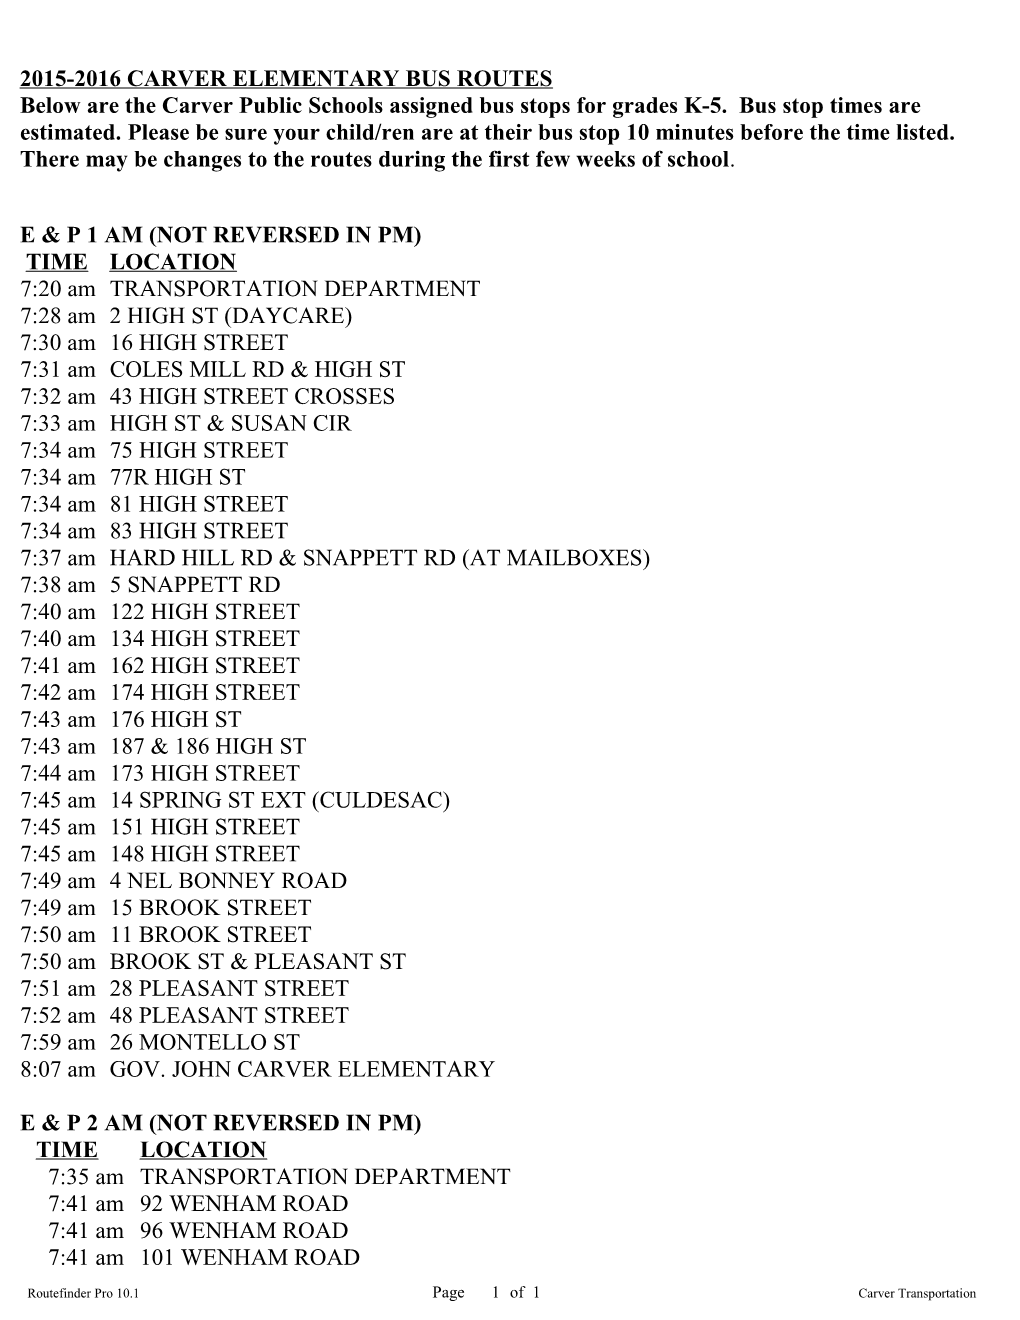 2015-2016 Carver Elementary Bus Routes